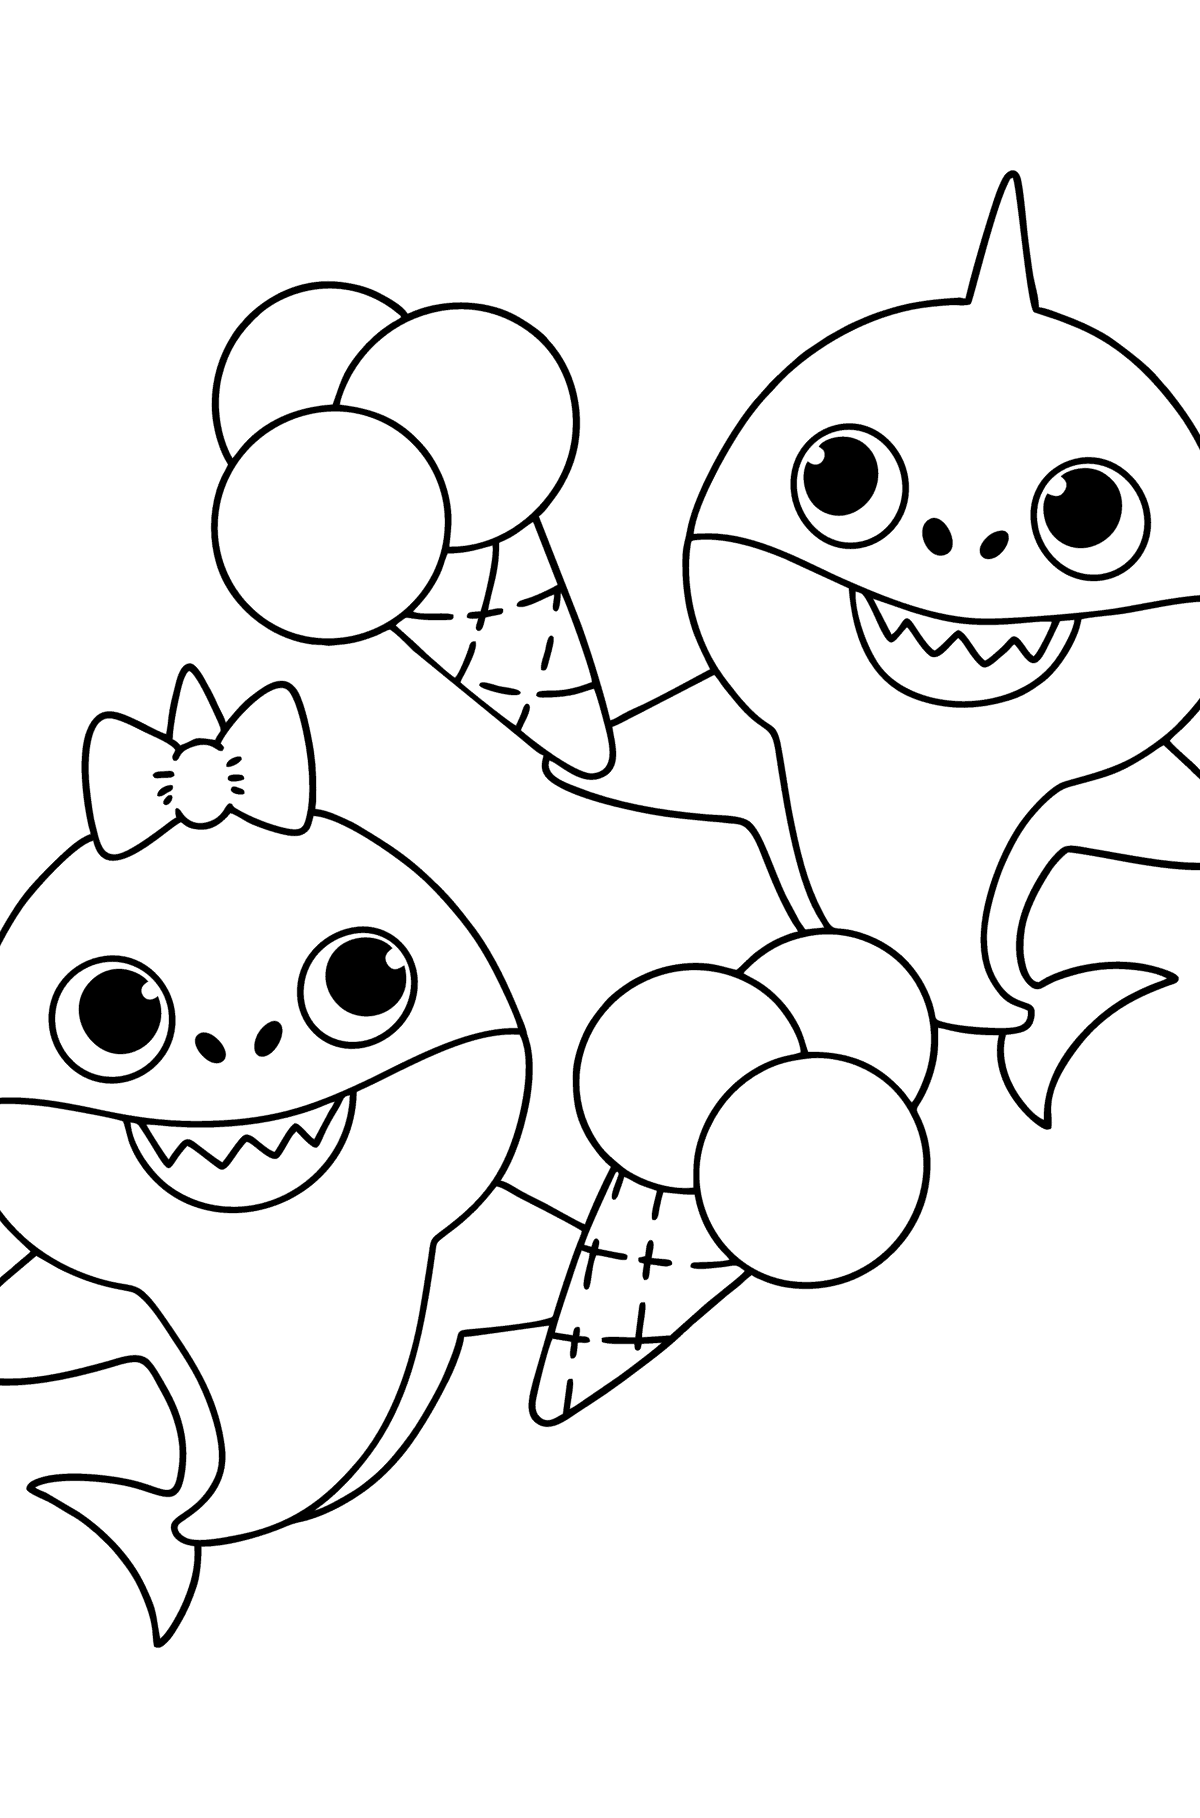 Brother and sister Baby shark coloring page - Coloring Pages for Kids